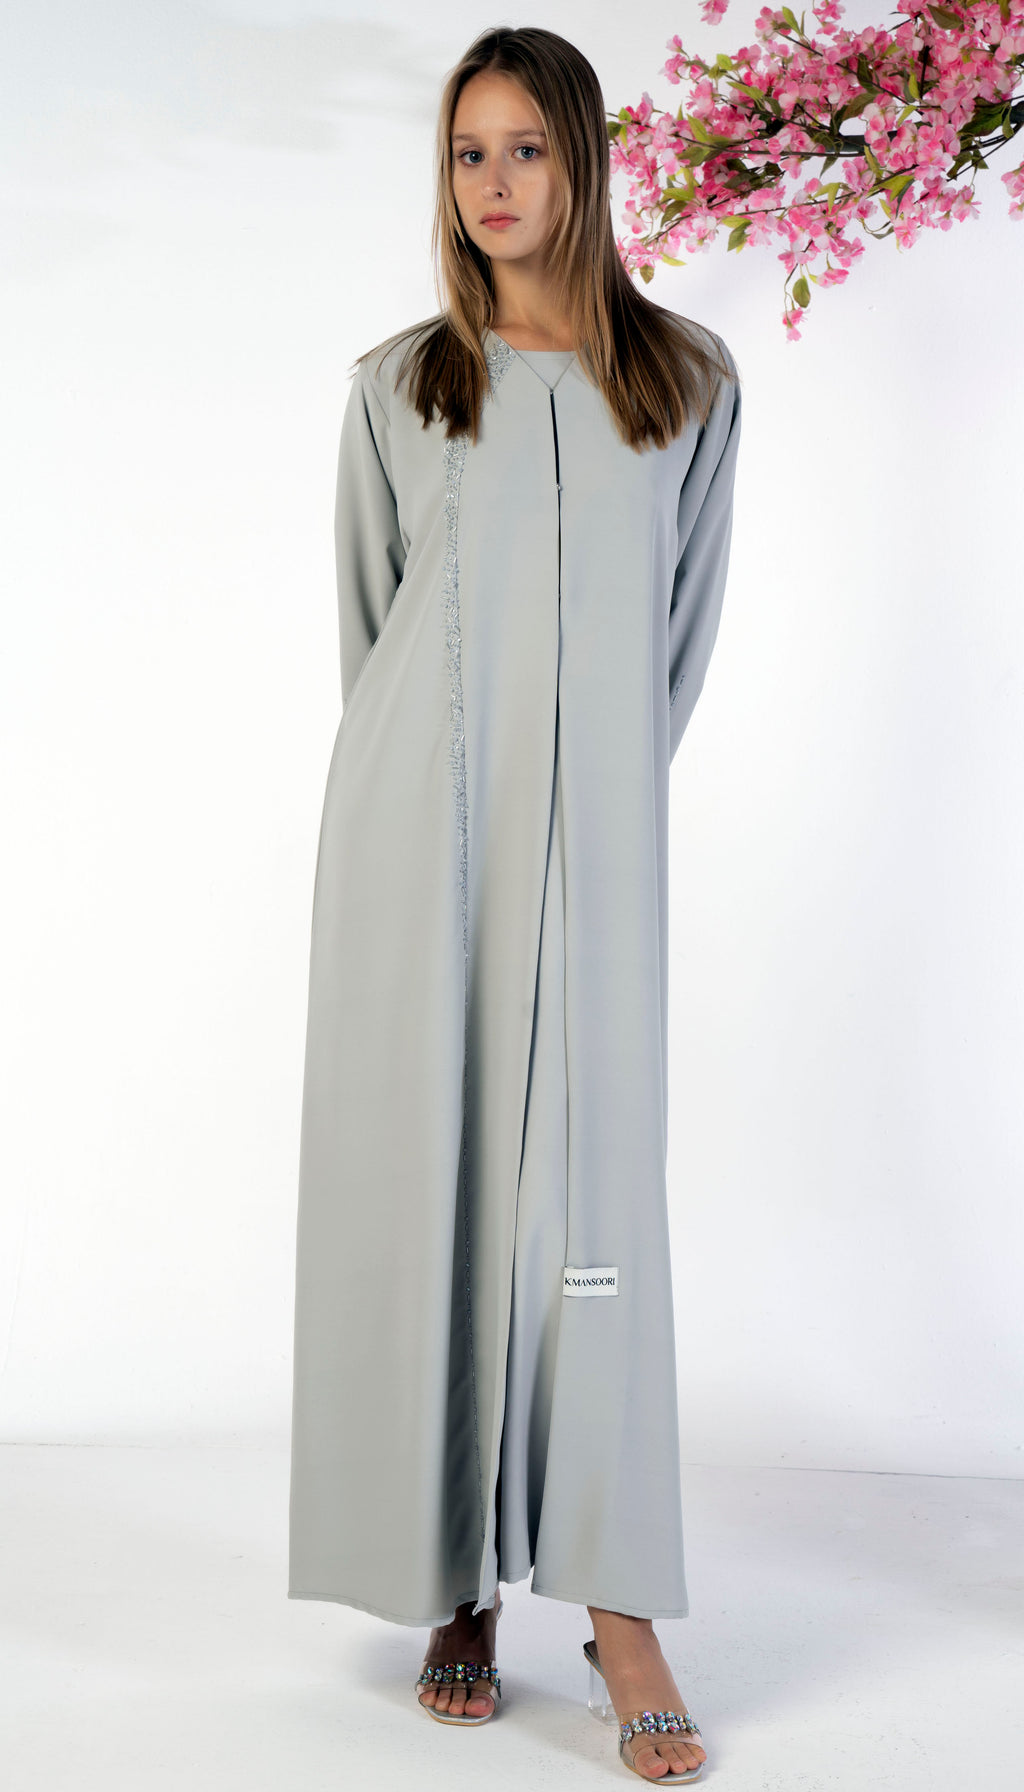 Soft Fabric Abaya With Elegant Curve Line Pattern Bead Work On Front